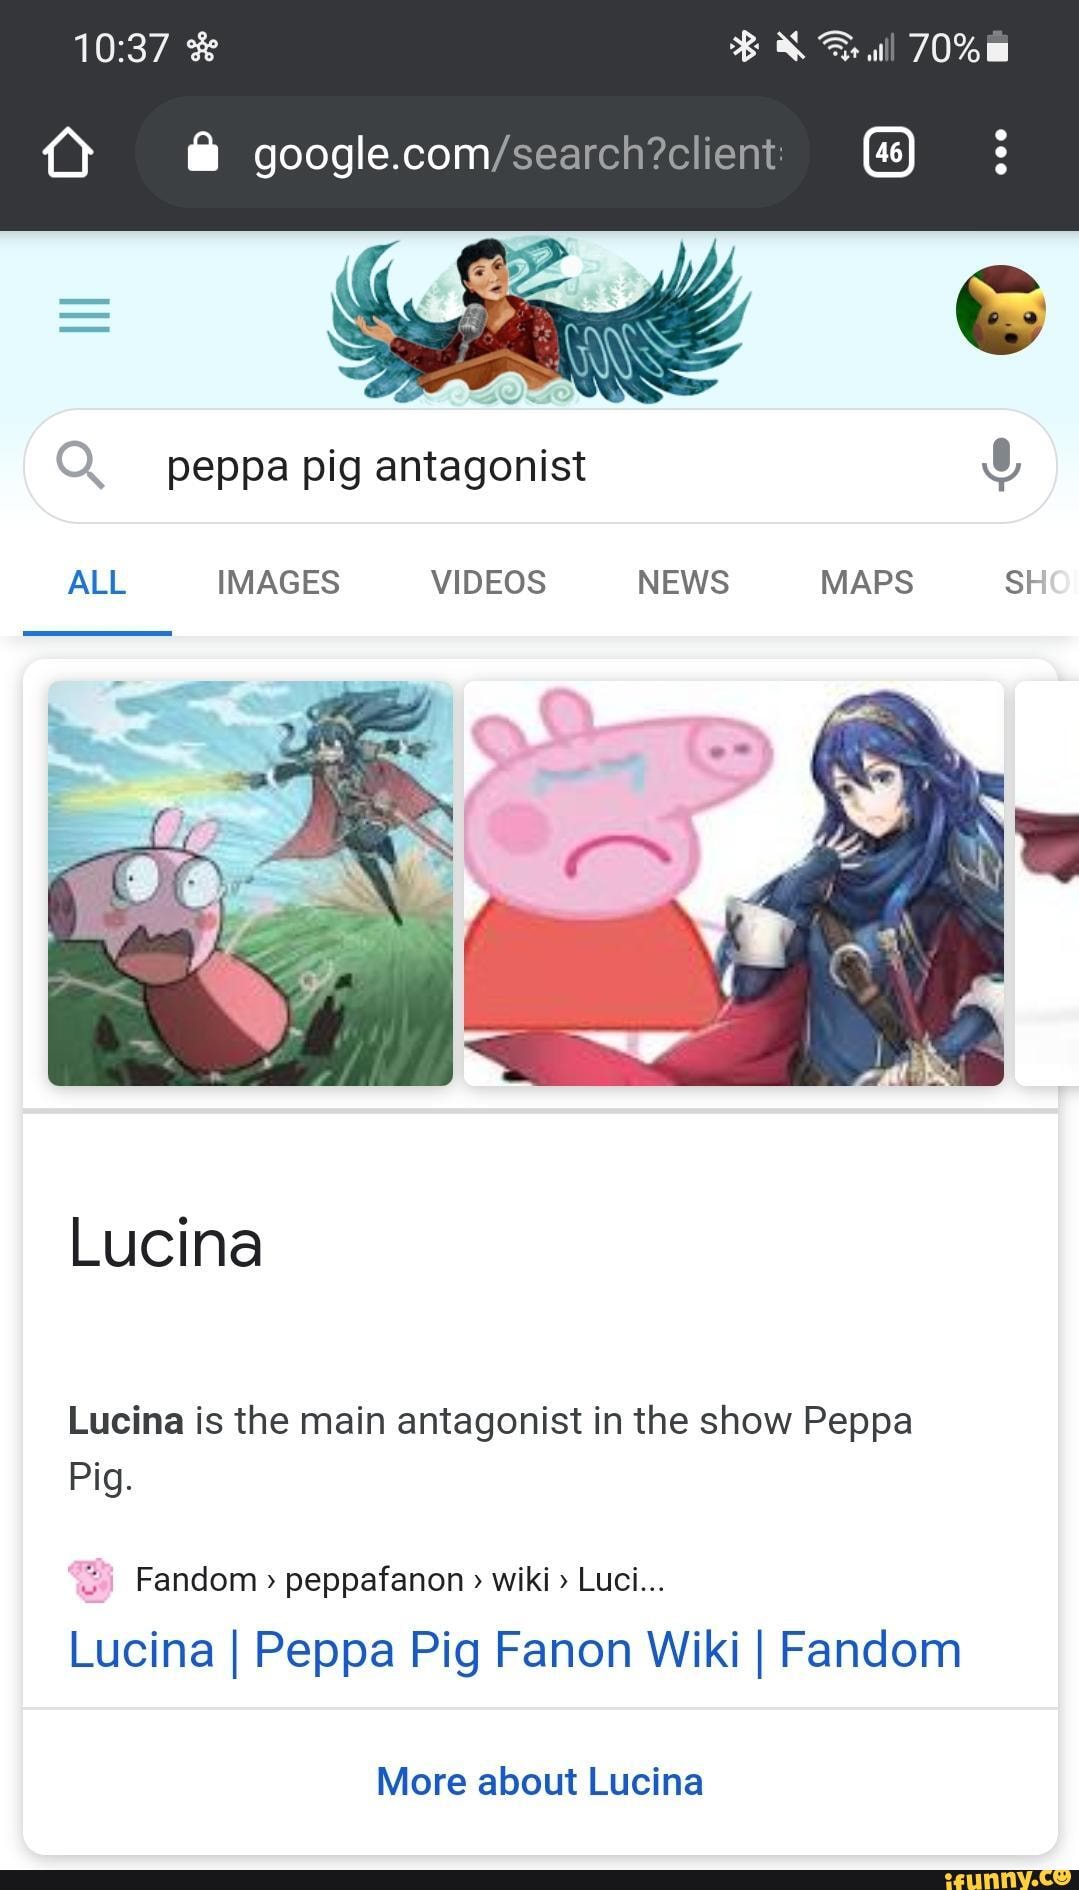 Q. peppa pig antagonist All Images Videos News Maps Lucina is the main  antagonist in the show Peppa Pig. She seems to hate the Pig family and  wants to kill every last